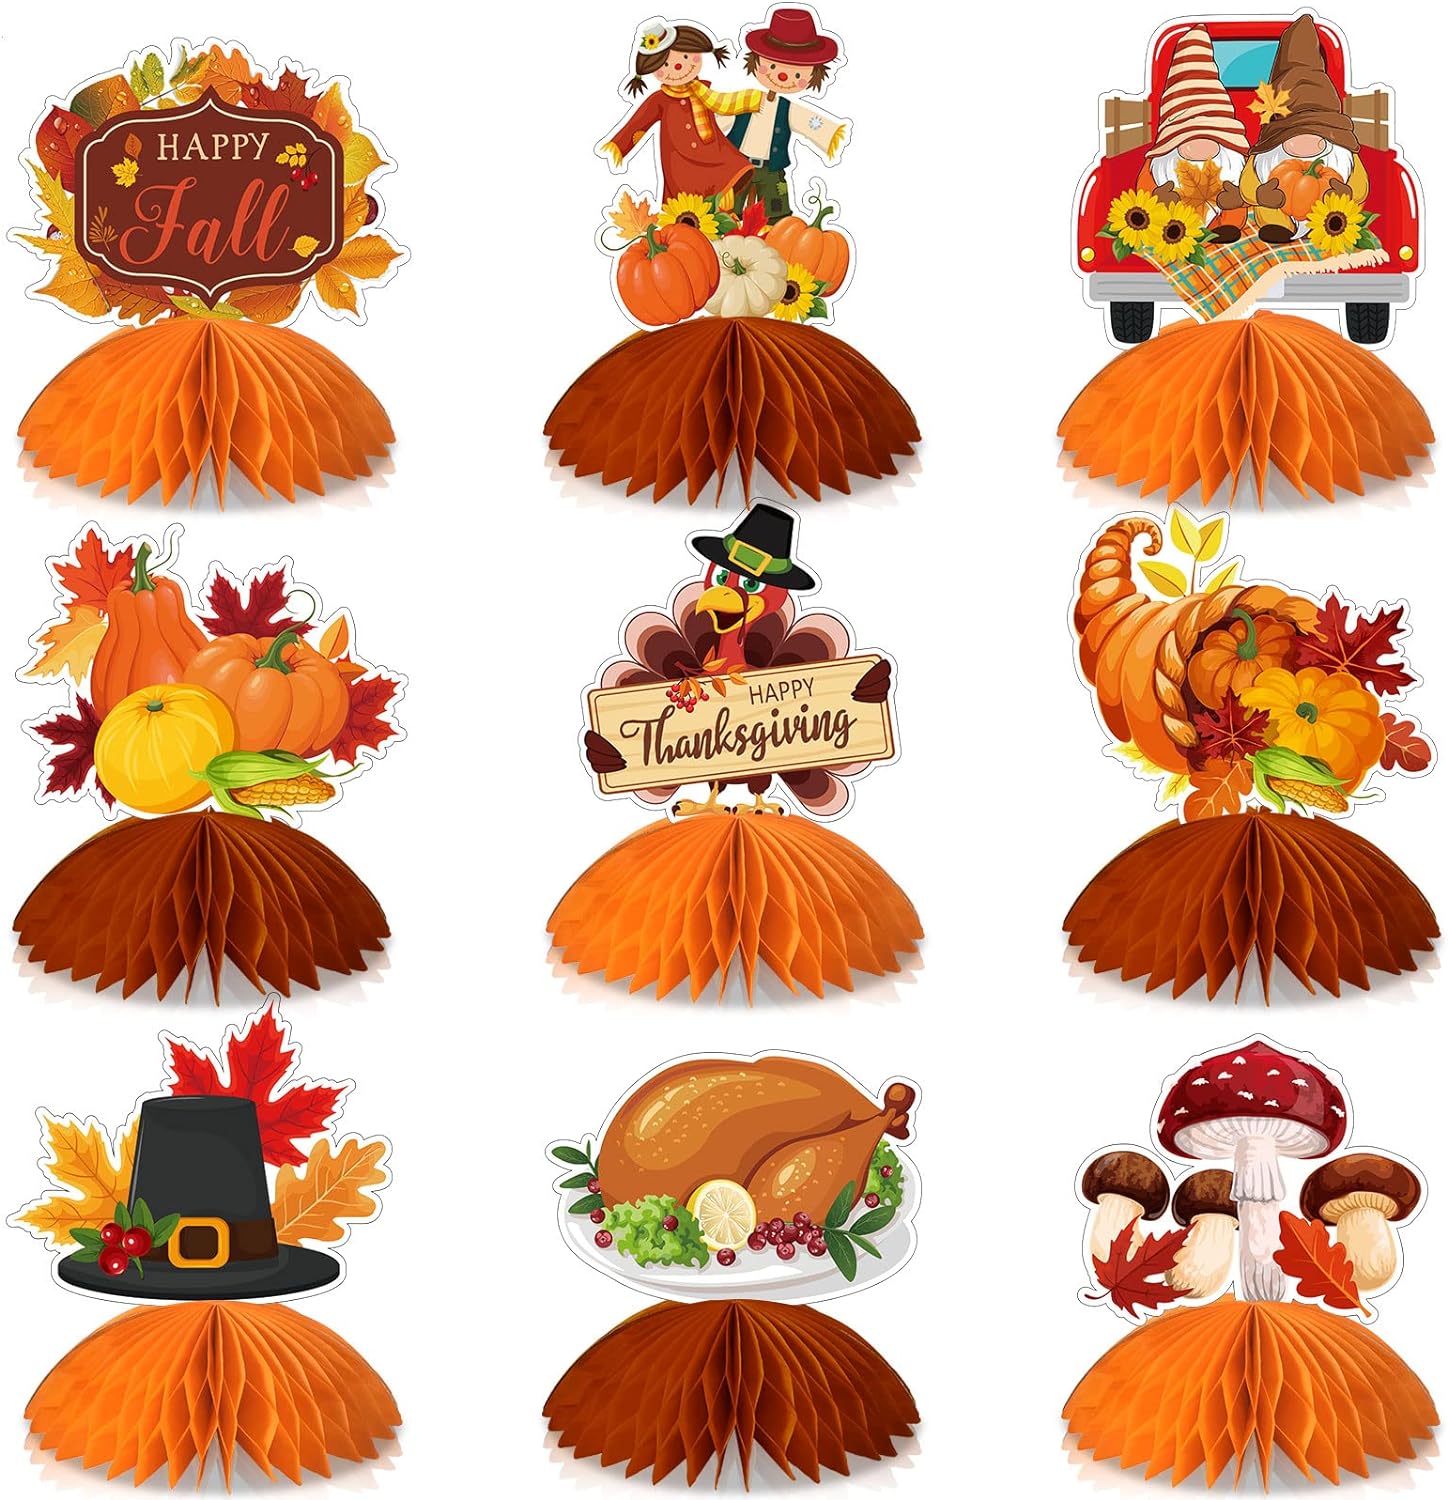 Pajean 9 Pieces Thanksgiving Turkey Honeycomb Centerpieces Thanksgiving Table Decorations Paper Turkey Pumpkin Fall Leaves Table Centerpiece for Thanksgiving Autumn Theme Fall Decor Party Supplies